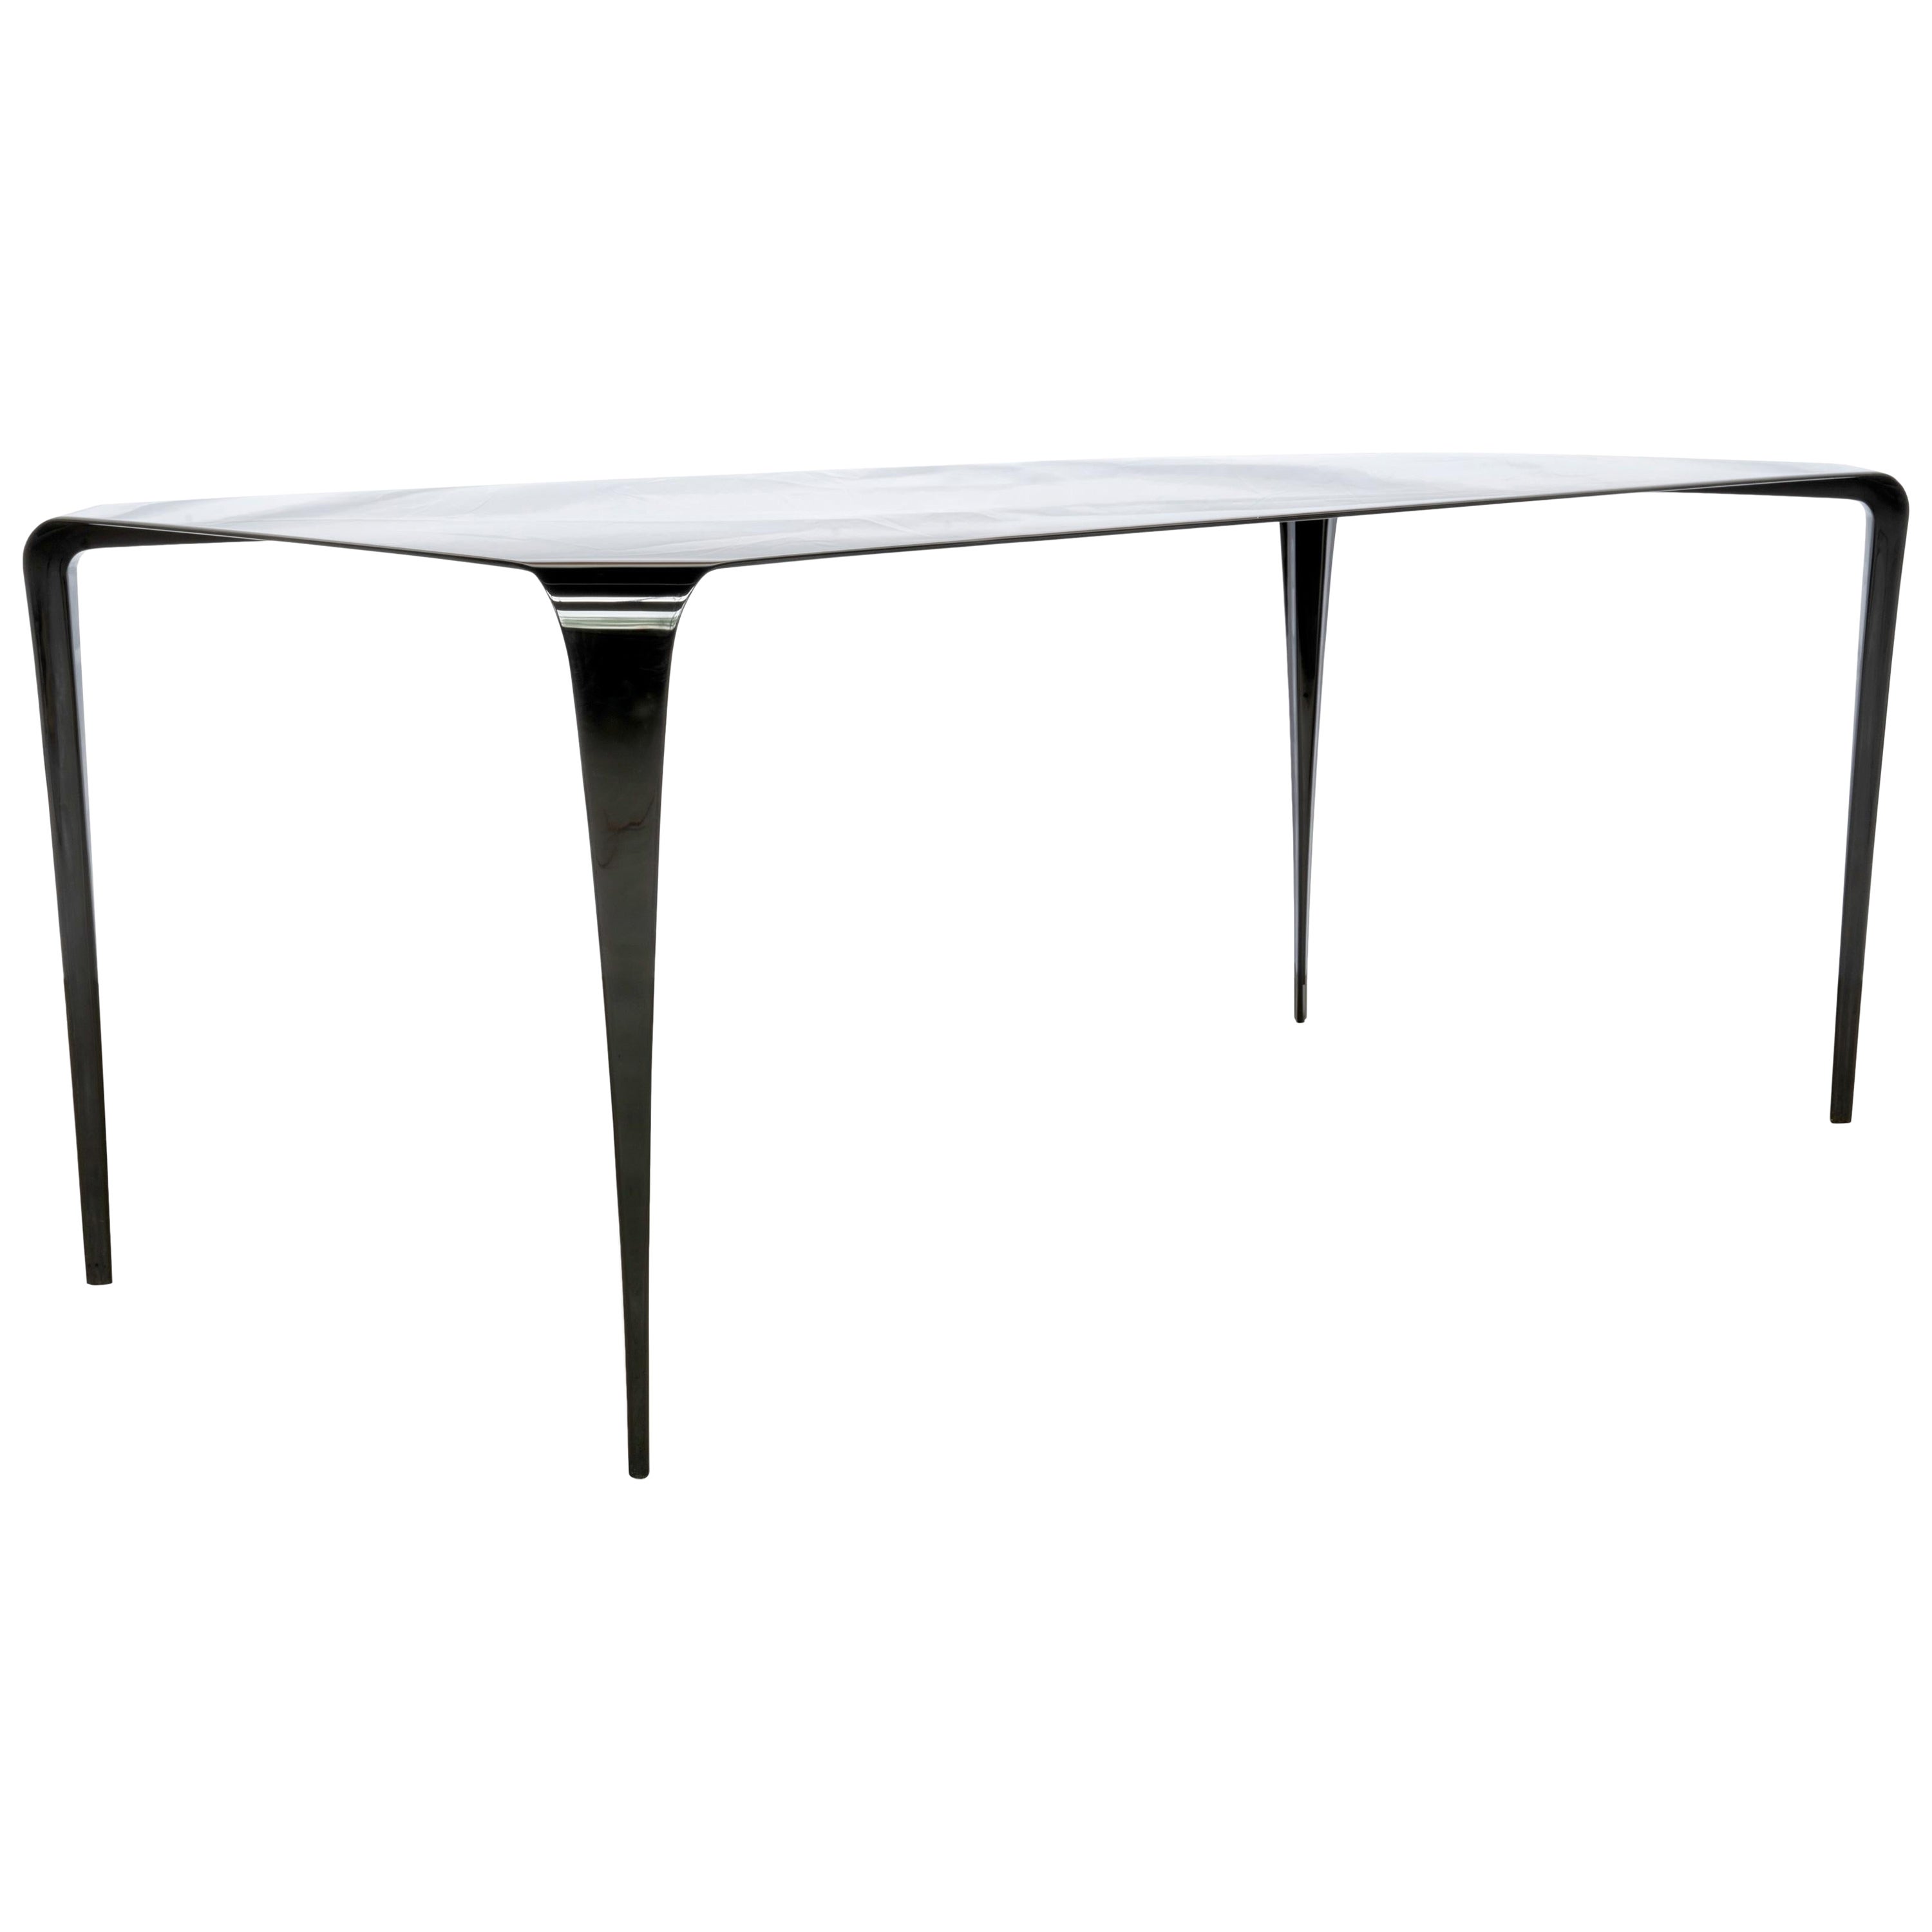 FLO - Metal dining room table with stiletto legs and custom finishes For Sale